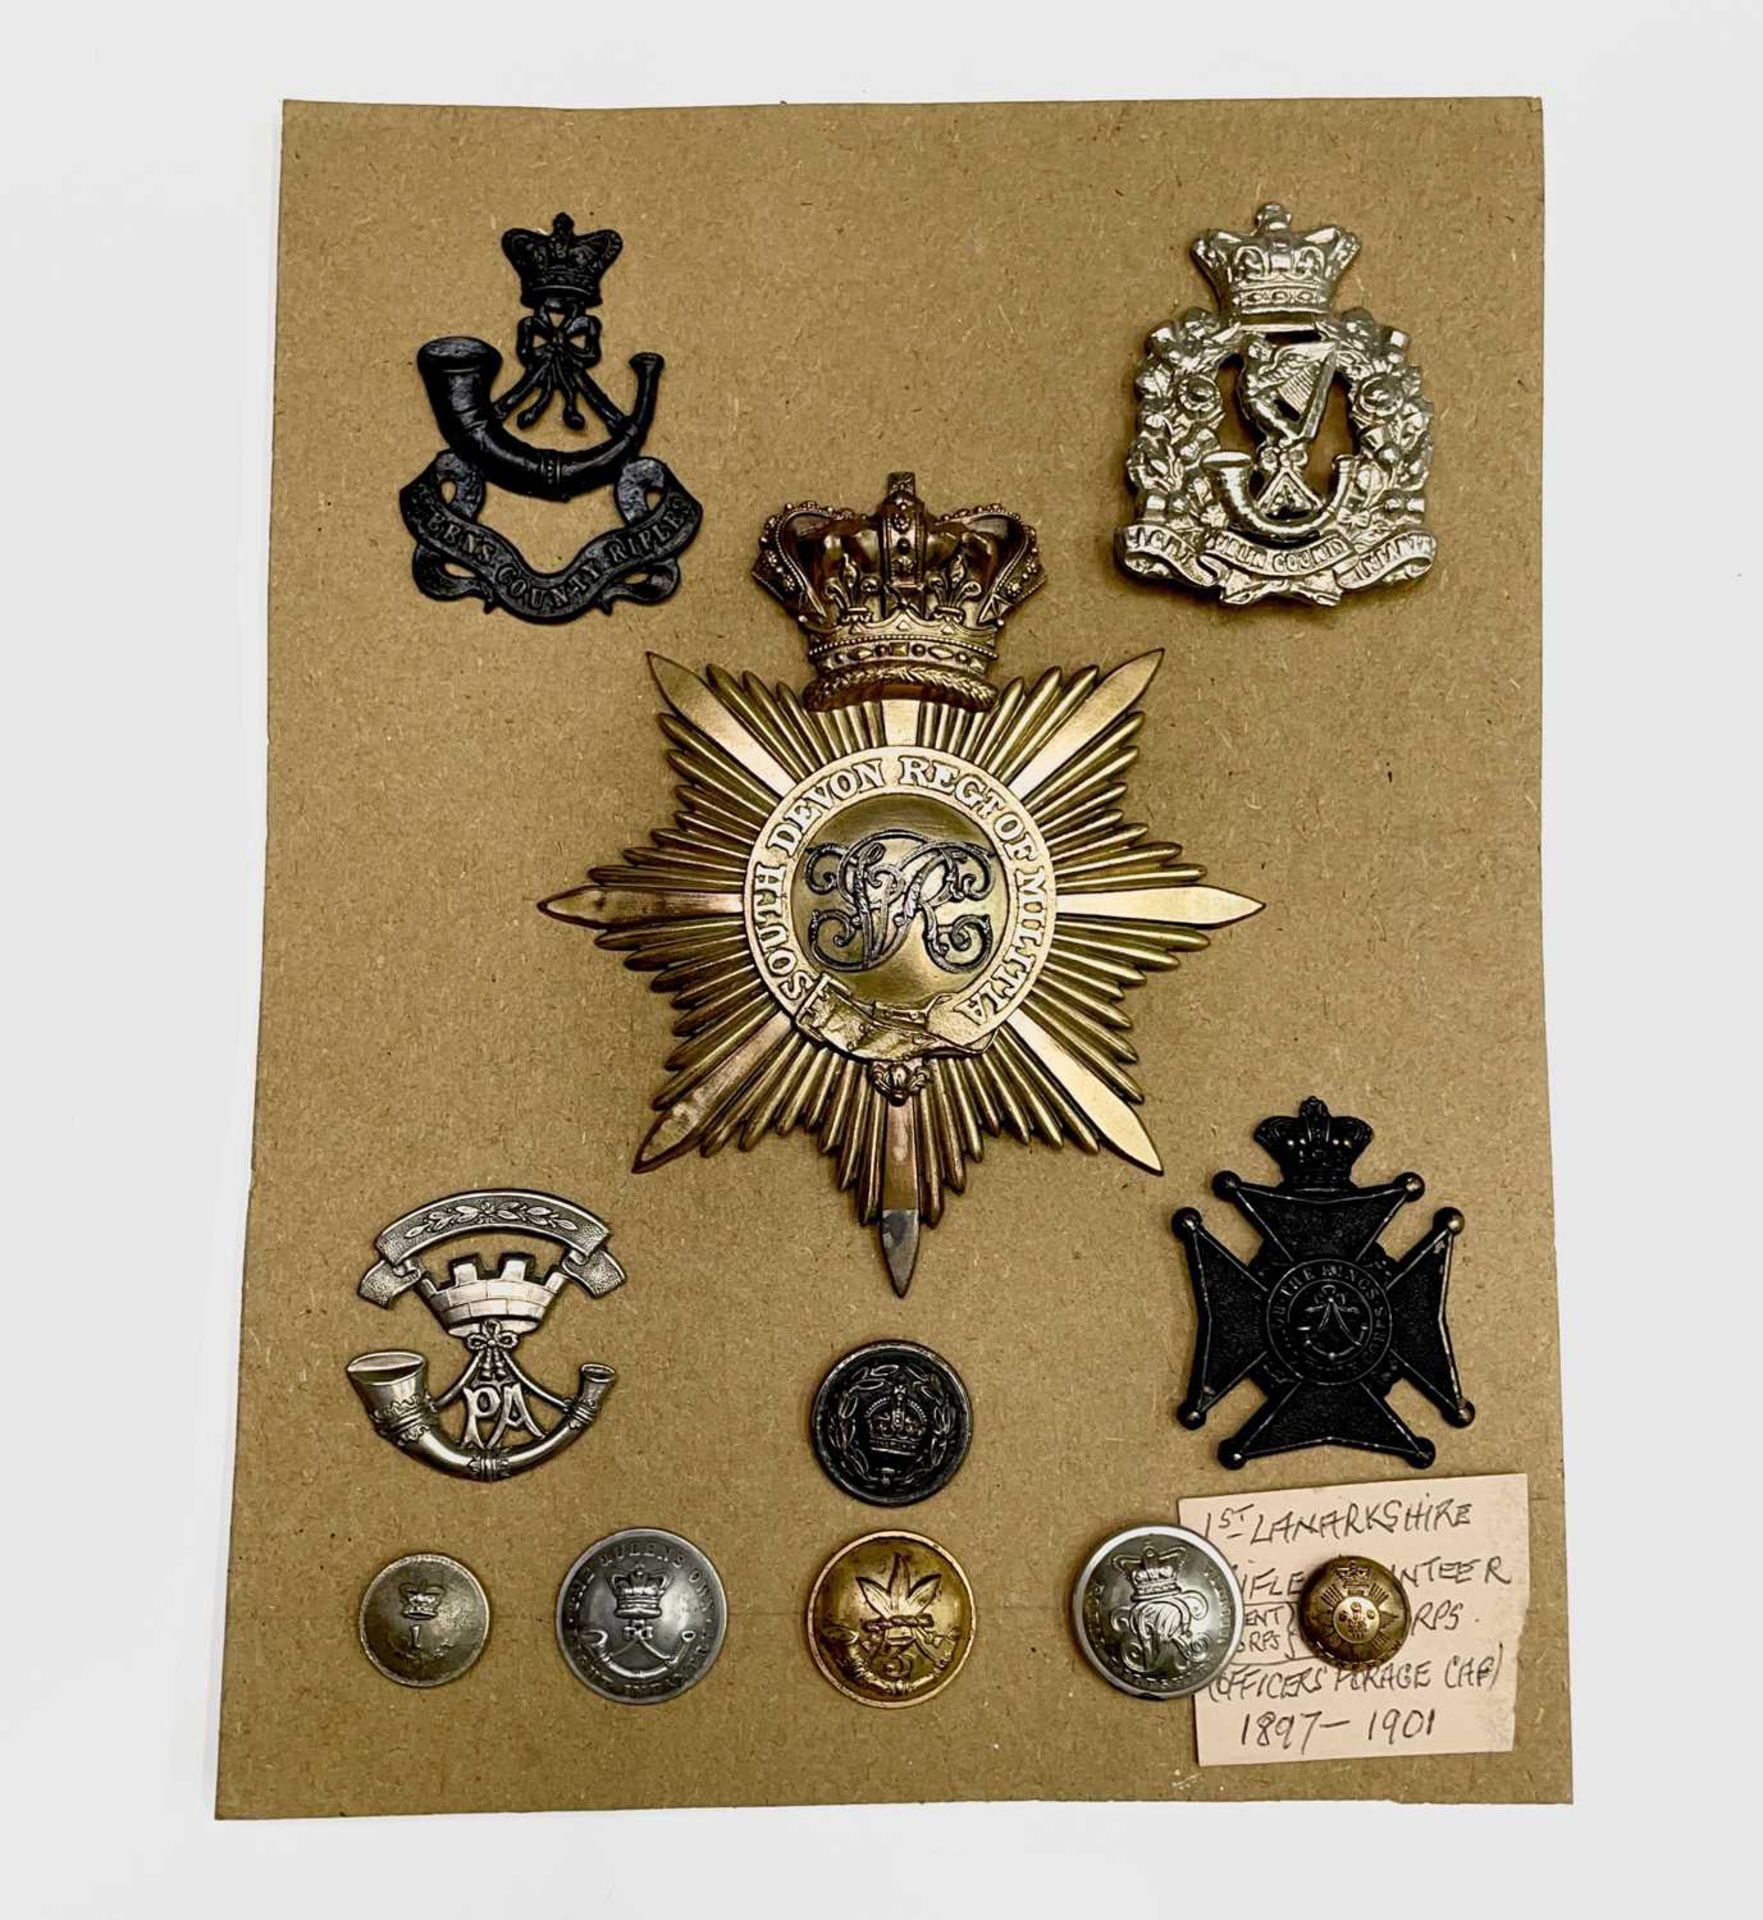 Shako Plate, Cap Badges and Buttons. A mainly 19th century card including South Devon Regiment of